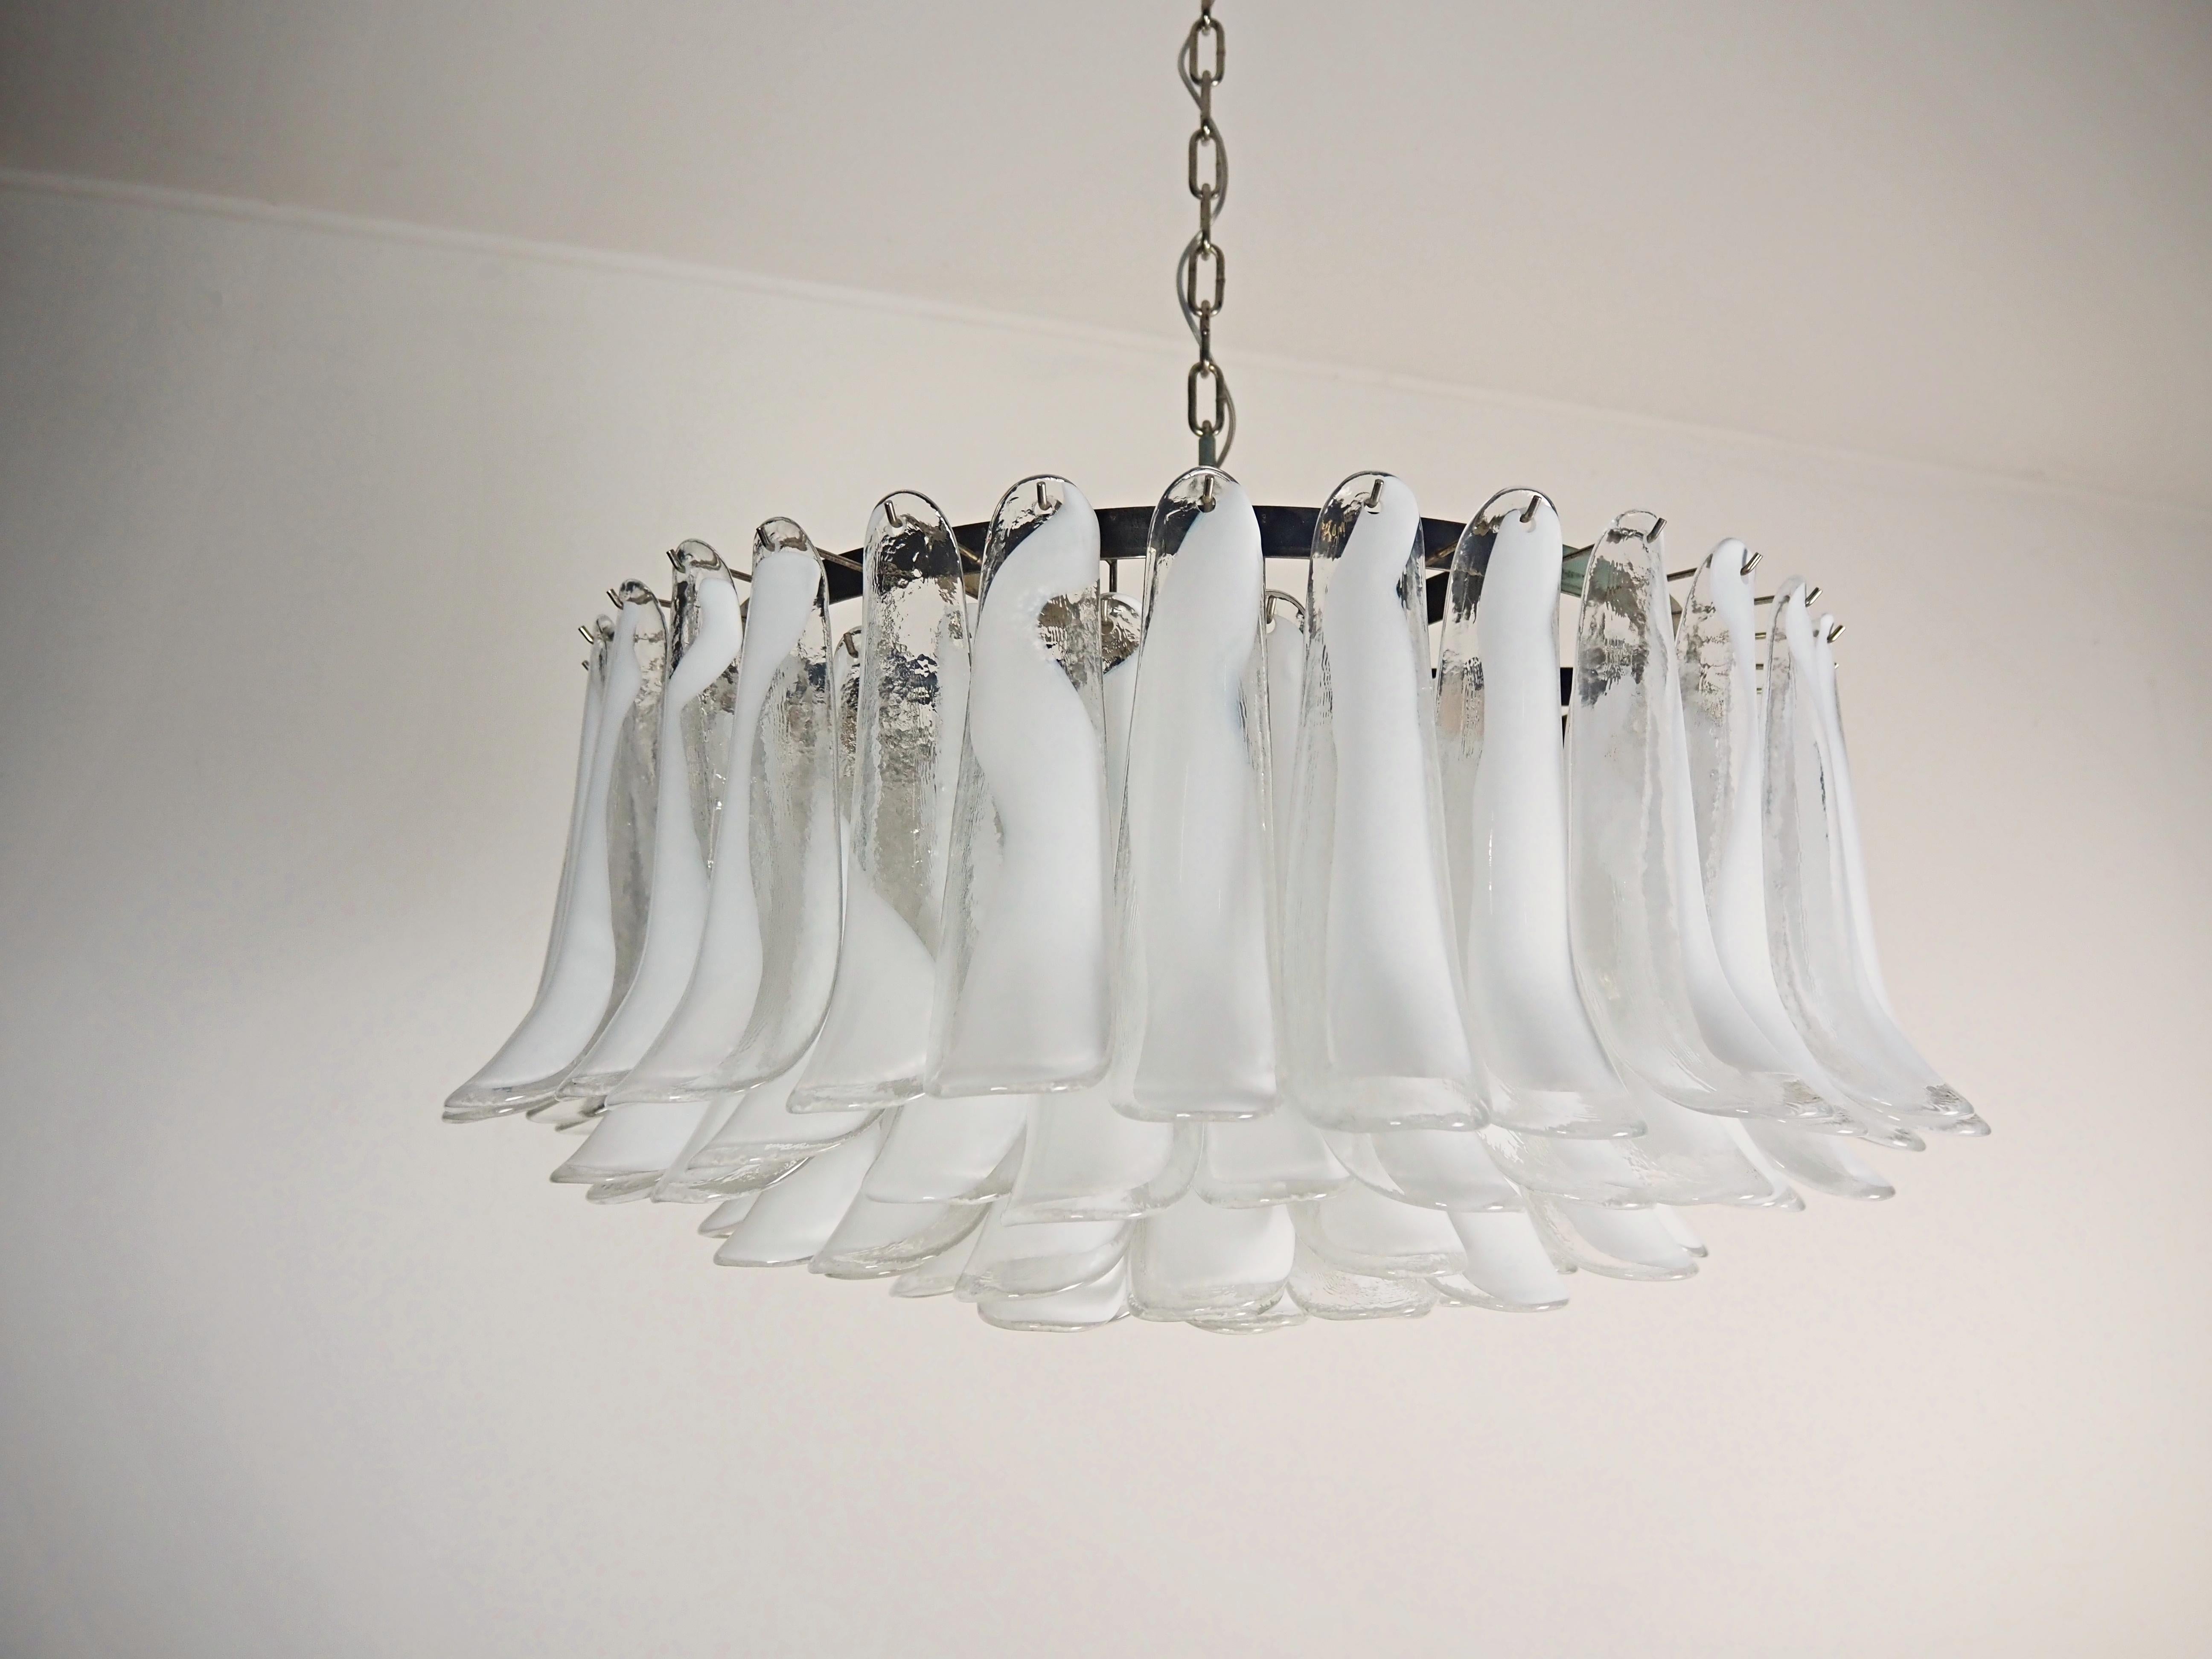 
Italian vintage chandelier in Murano glass and nickel plated metal structure. The armor polished nickel supports 101 white lattimo Murano glass petals. Can be used as a chandelier with chain, or as a ceiling light, the structure will be hung